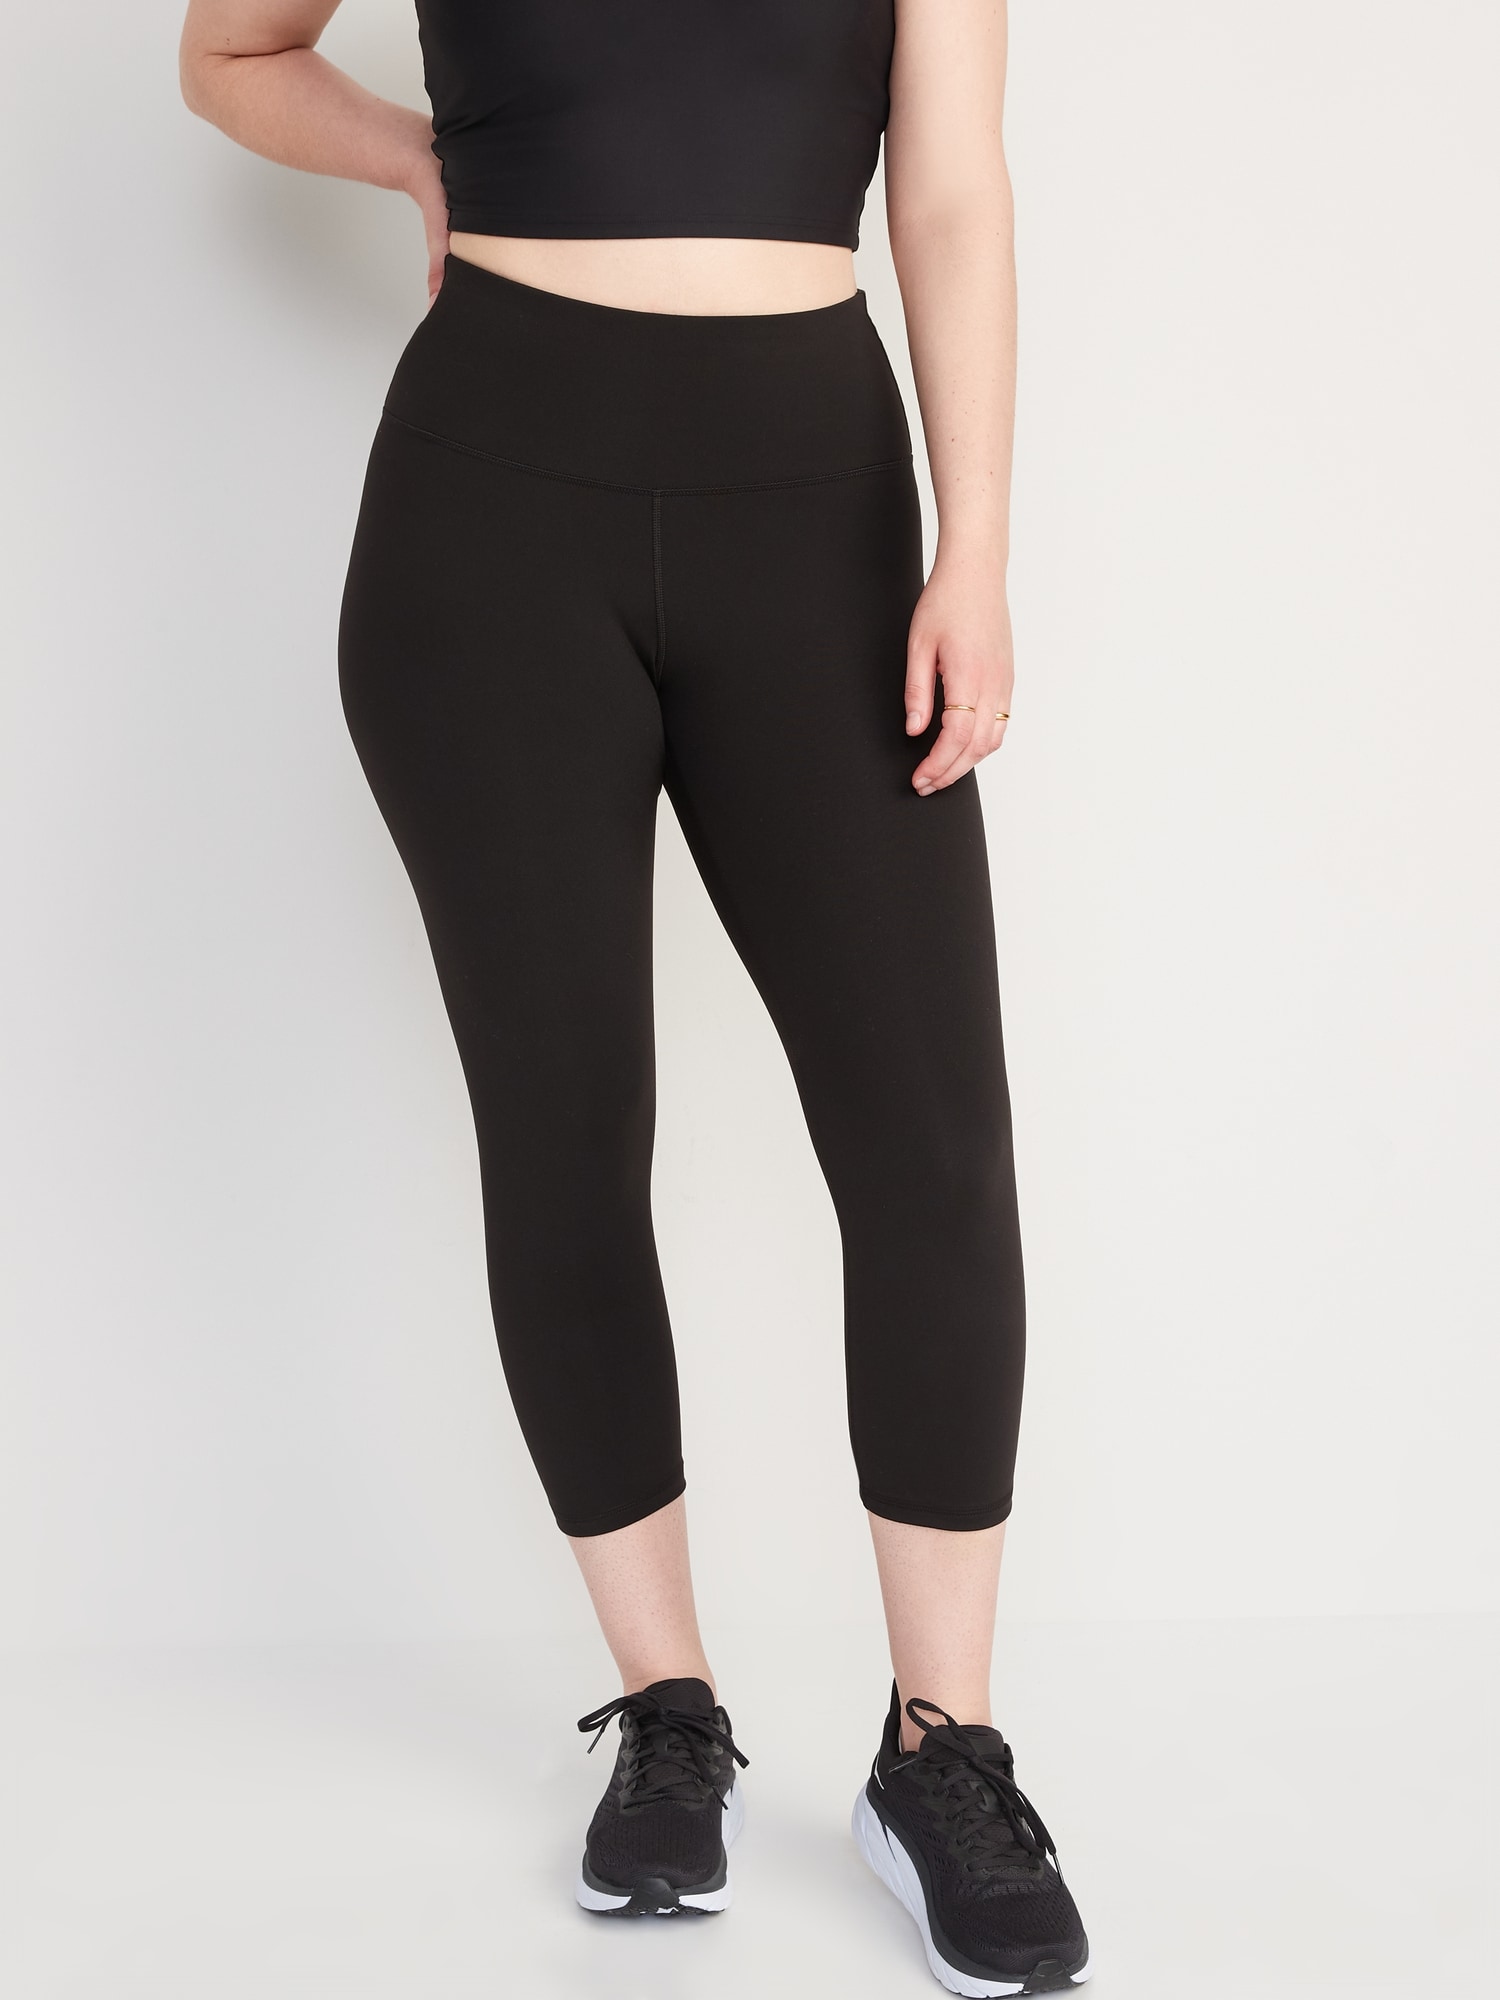 Buy online Mid Rise Solid Leggings from Capris & Leggings for Women by Dark  Black Style for ₹319 at 68% off